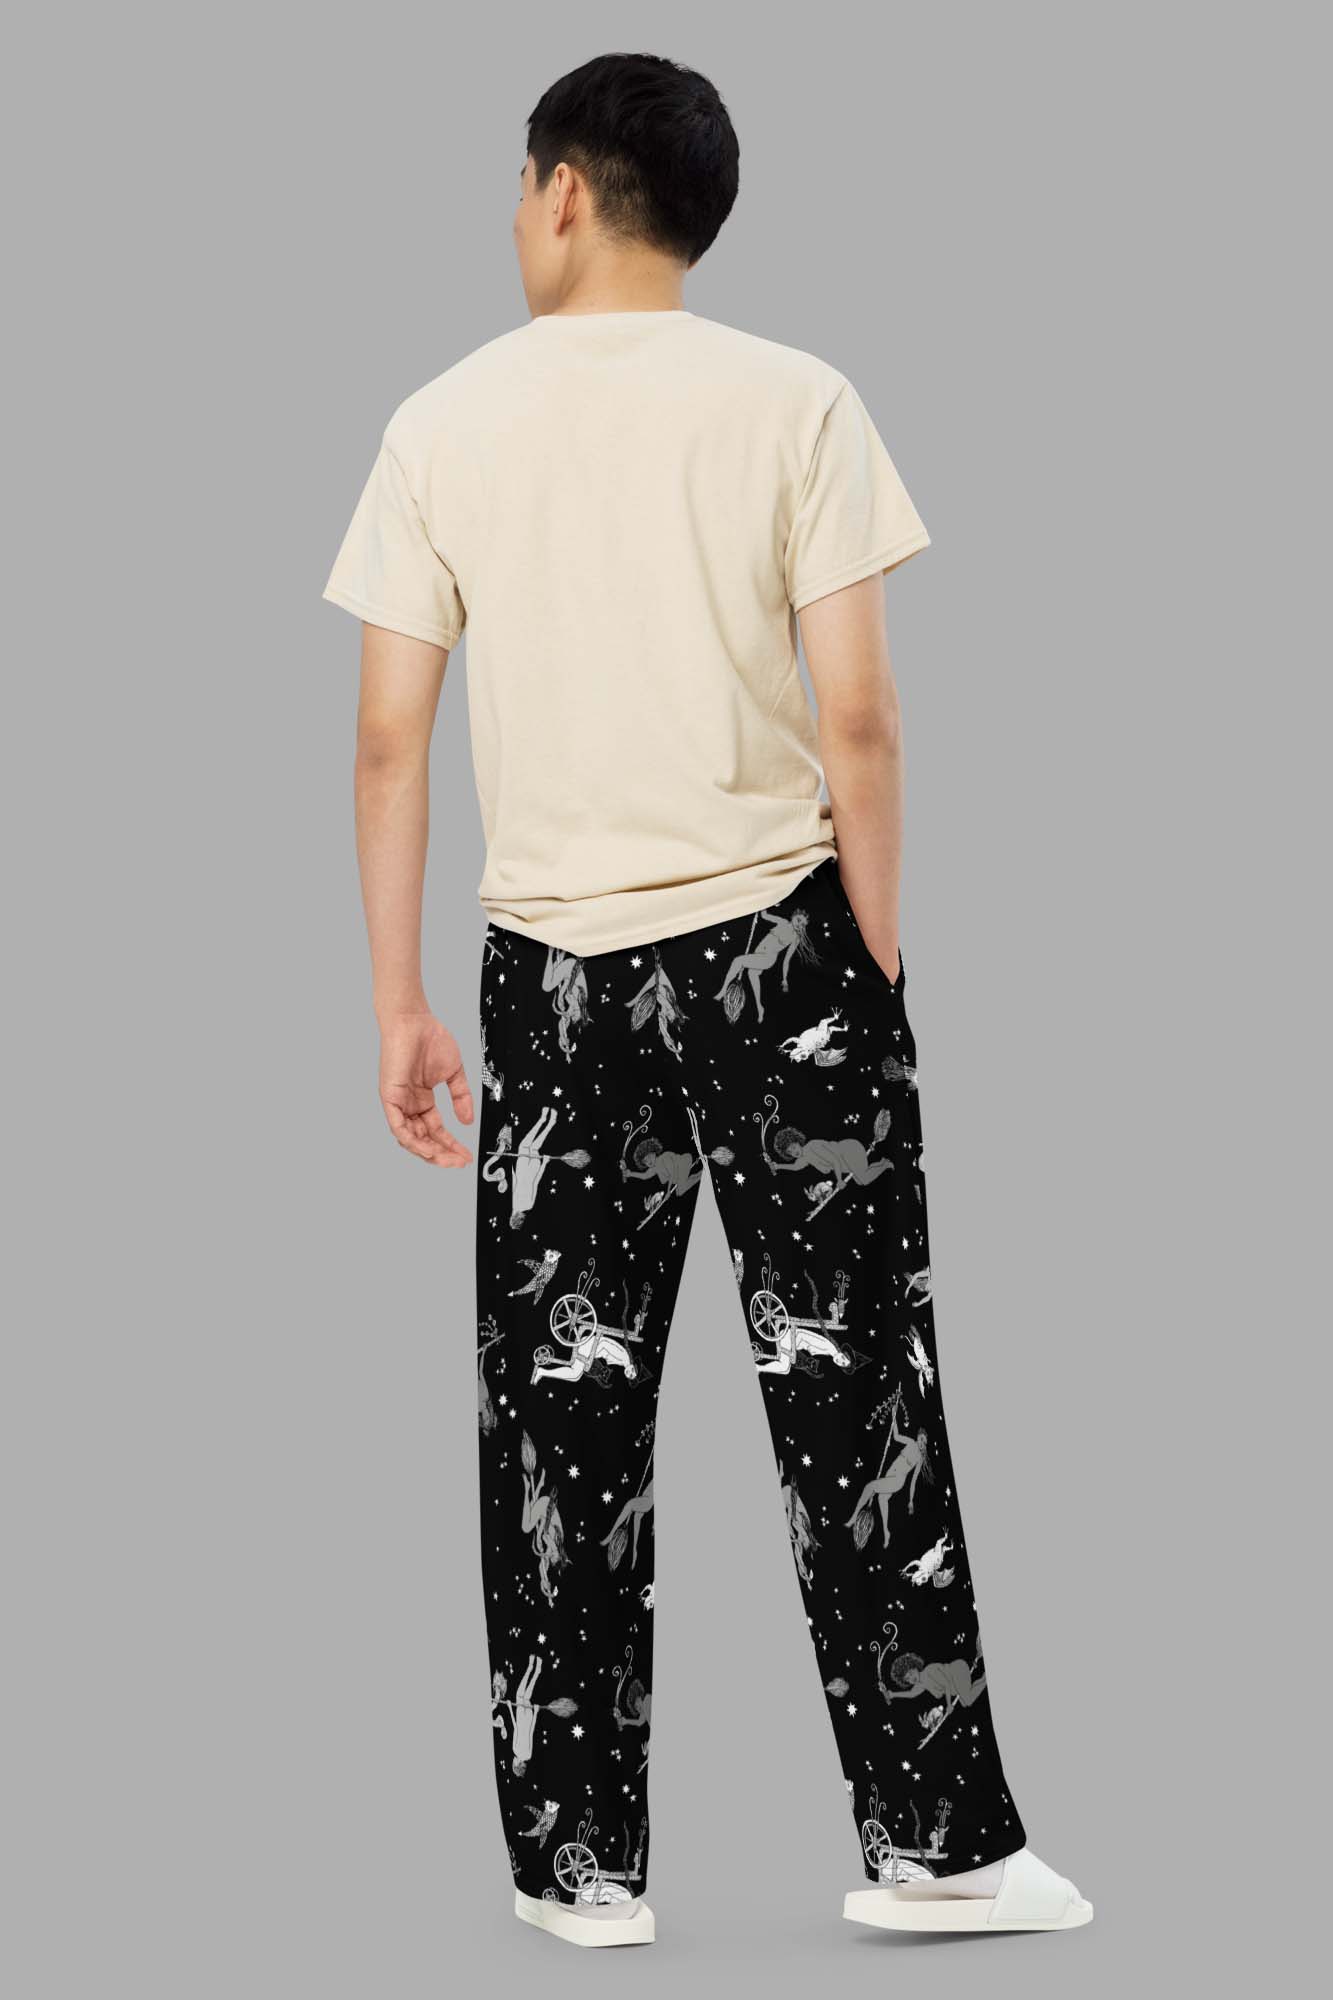 THE CARGO TROUSERS – Cosmic Clothing